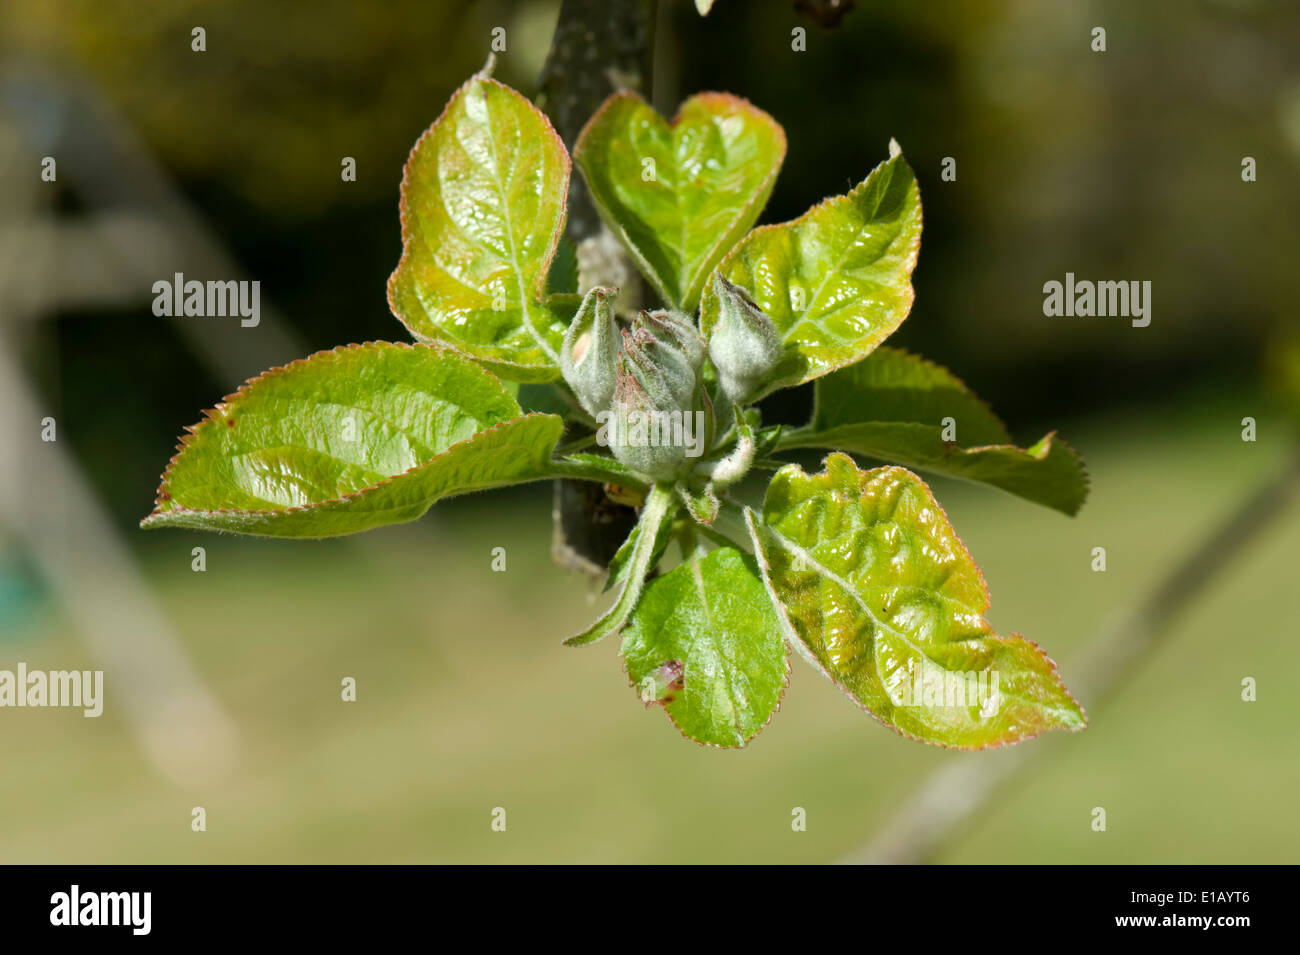 Green tight flower buds and a young leaf rosette on an apple tree in spring Stock Photo